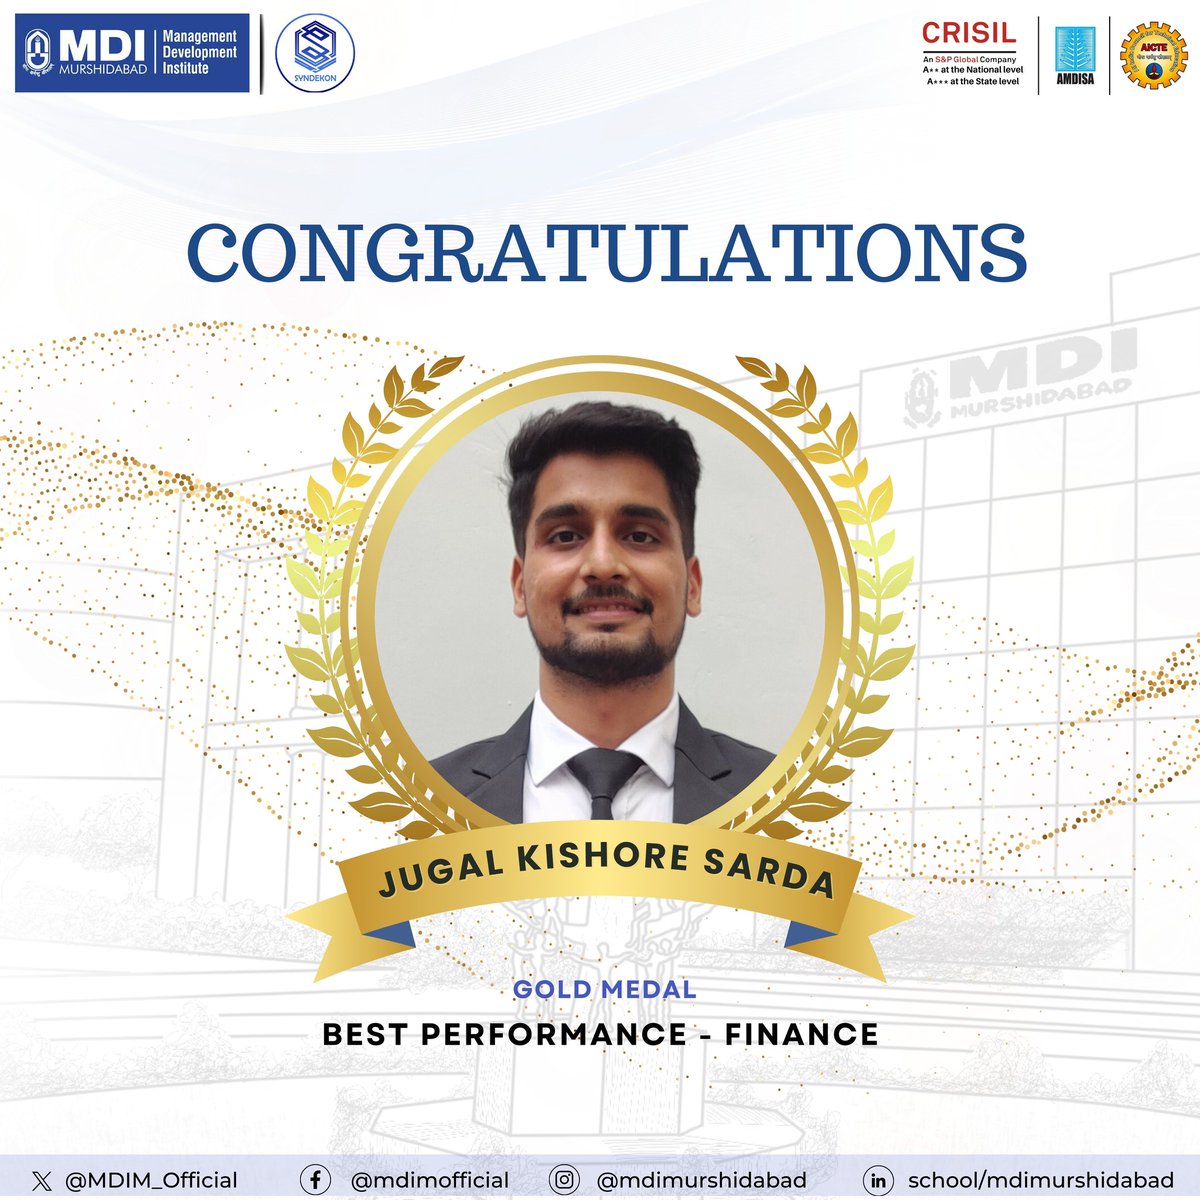 #MDIM proudly honors  Mr Jugal Kishore Sarda for earning the prestigious Gold Medal in #Finance for the #PGDM class of 2022-24.His exceptional dedication and academic excellence serve as a beacon of inspiration for his peers in the Finance domain. #MBA #MDI #Management